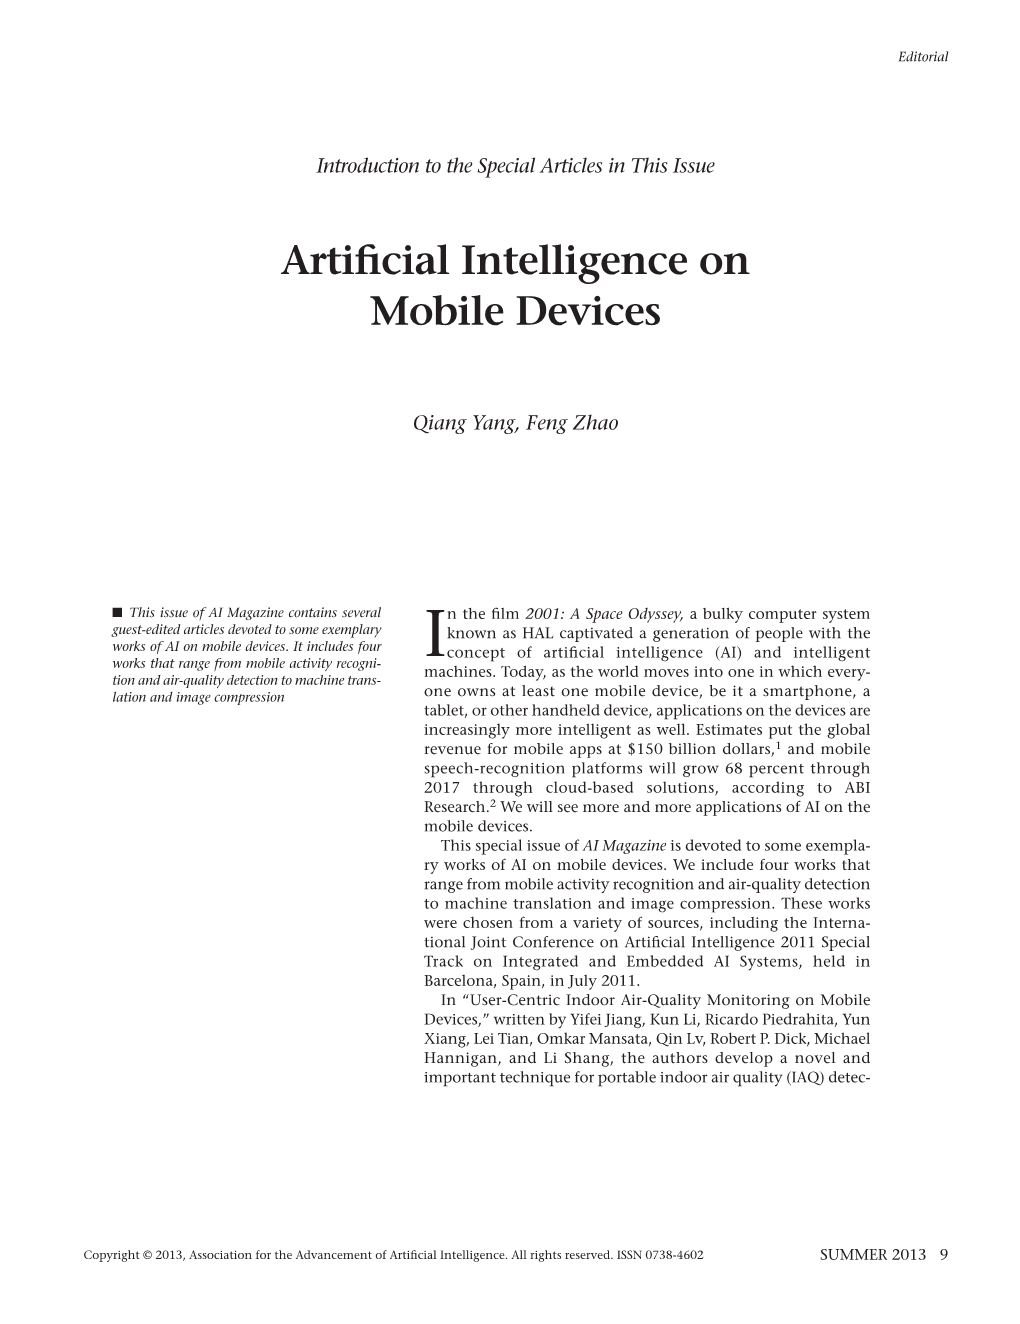 Artificial Intelligence on Mobile Devices